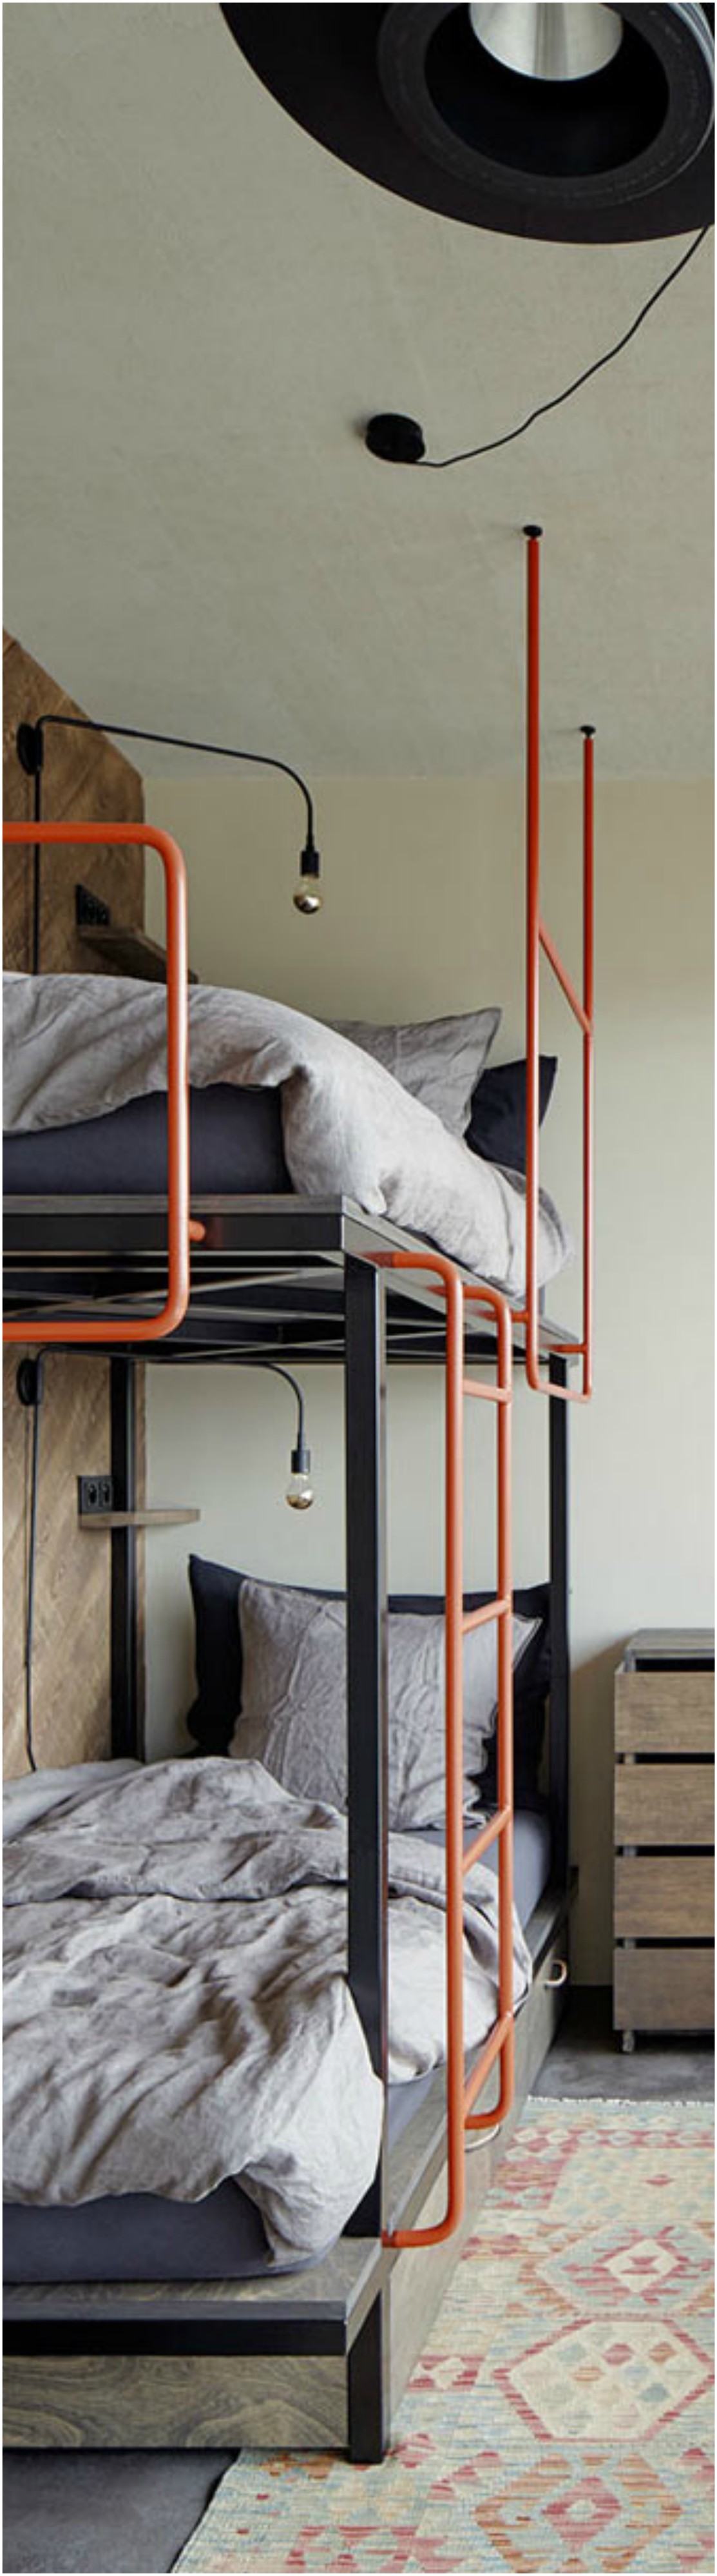 Industrial Style Bunk Bed Finished Off With Orange Metal Components Thewowdecor